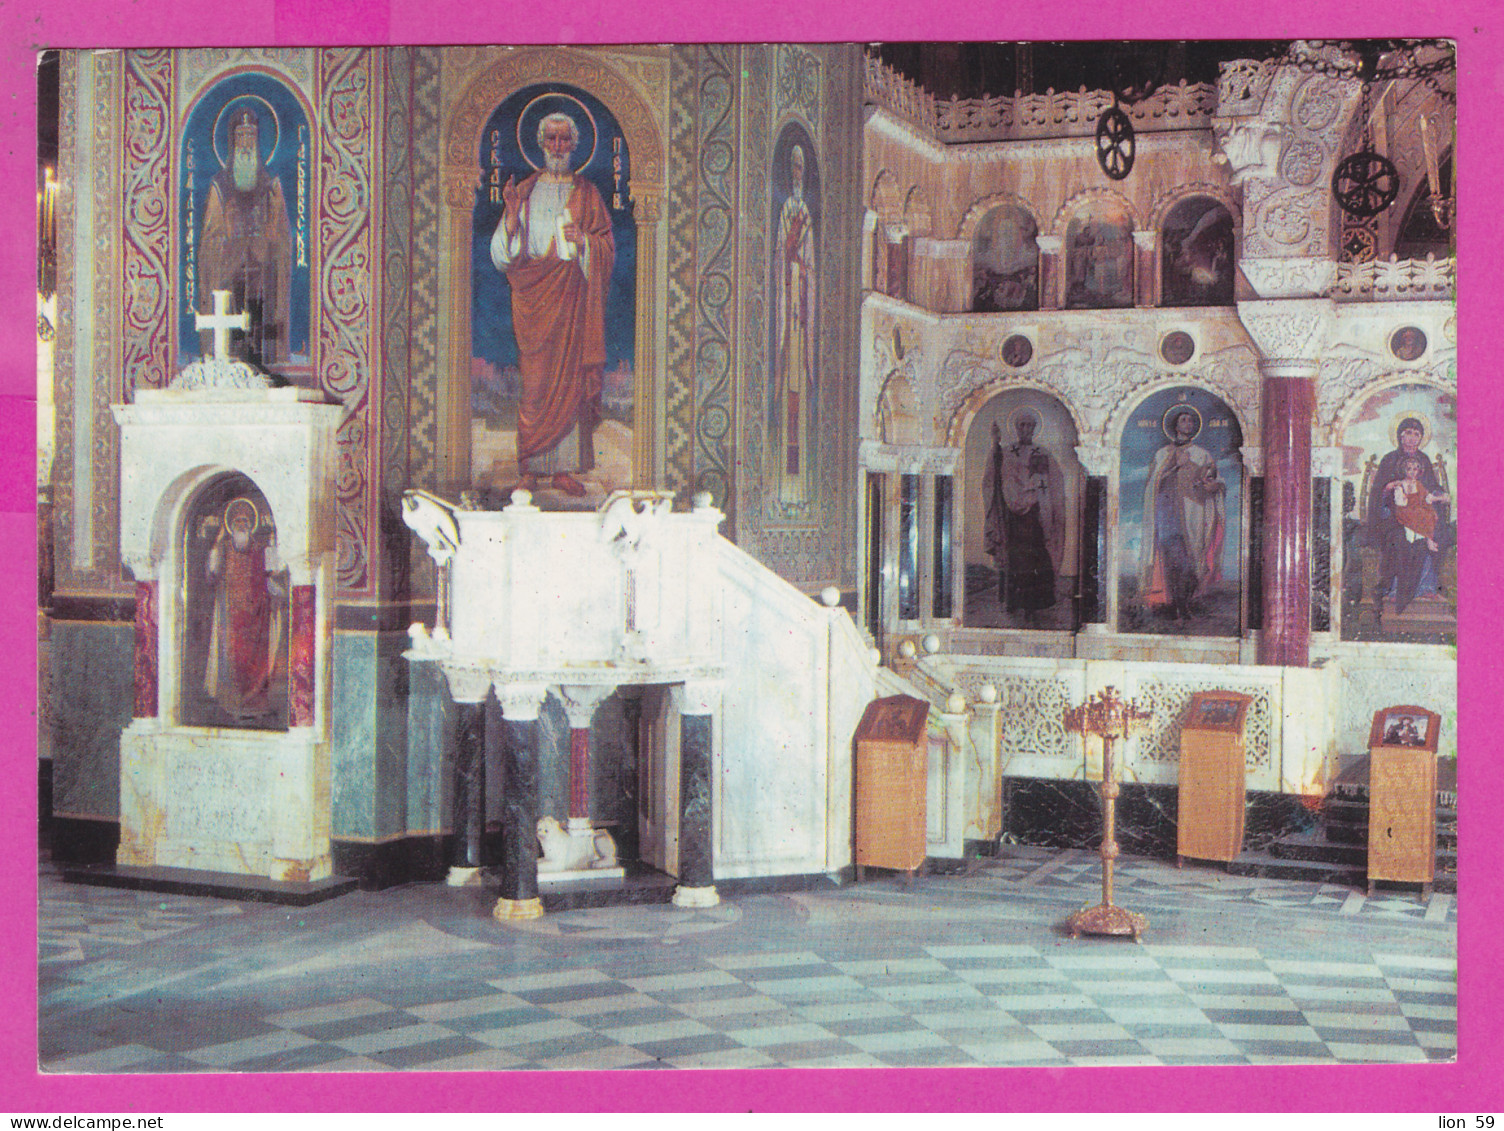 311273 / Bulgaria - Sofia - The Pulpit And Part Of Central Altar - Patriarchal Cathedral Of St. Alexander Nevsky 1979 PC - Iglesias Y Catedrales